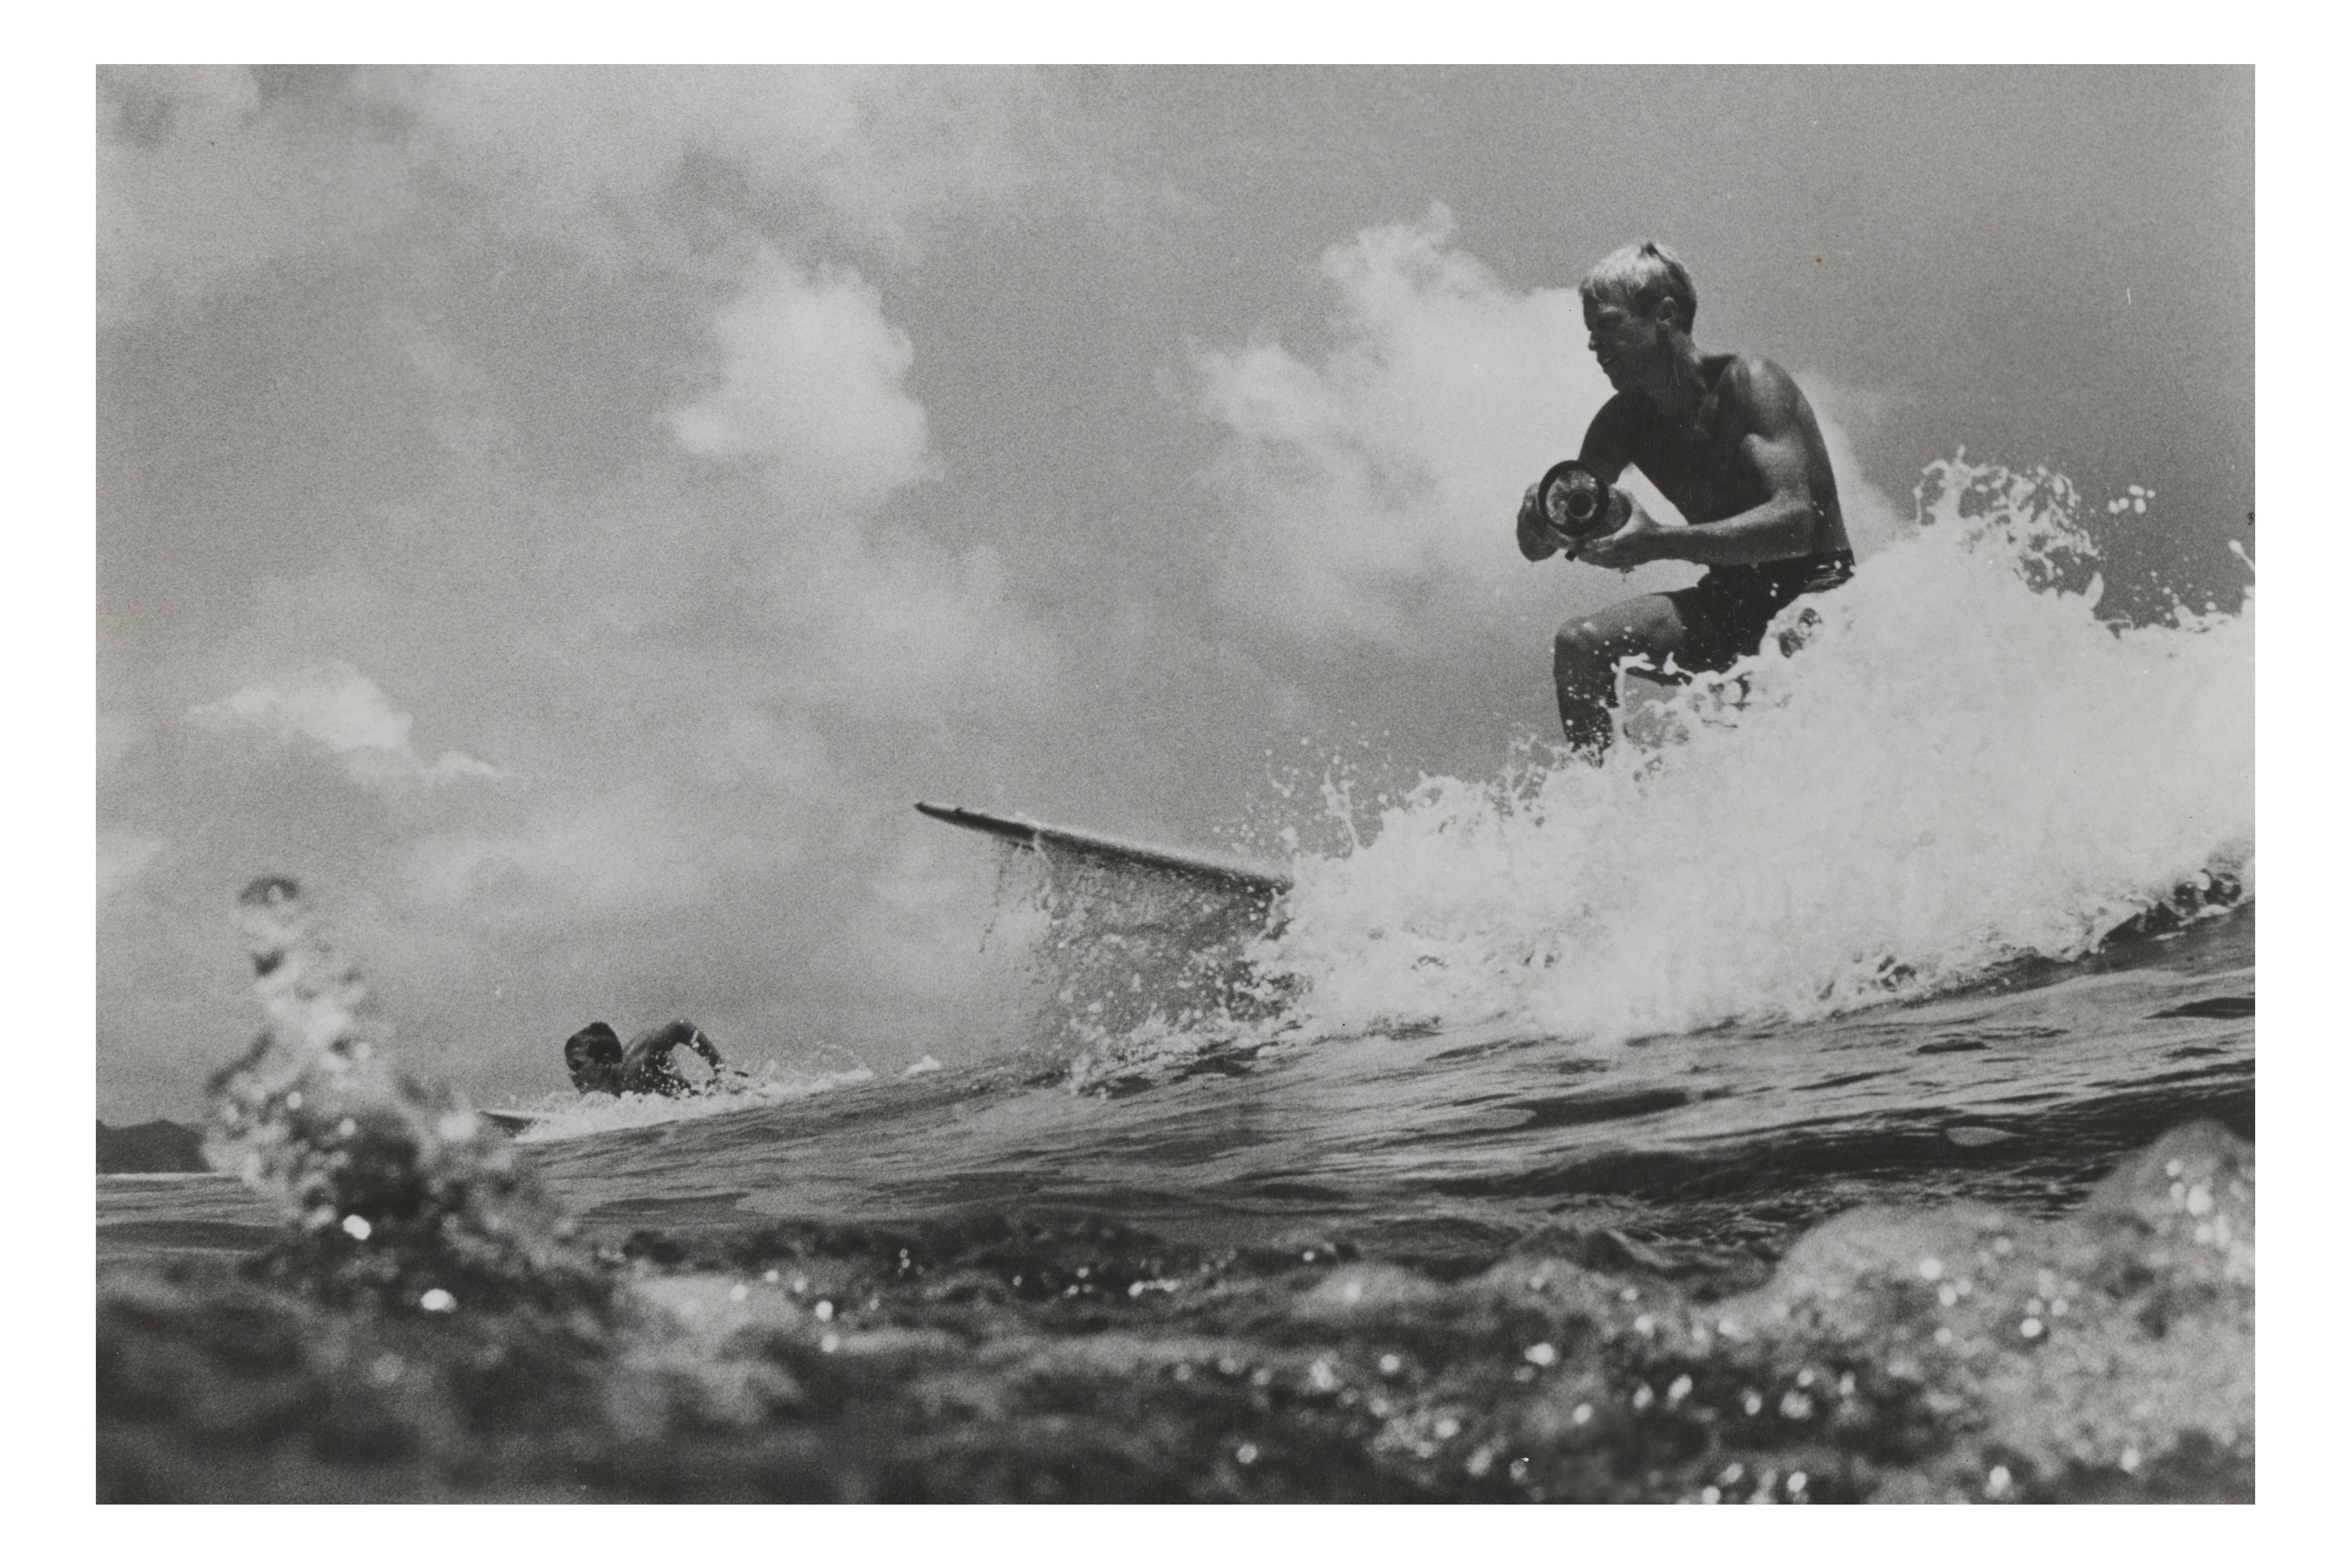 Bruce Brown A4 B/W Surfing Action